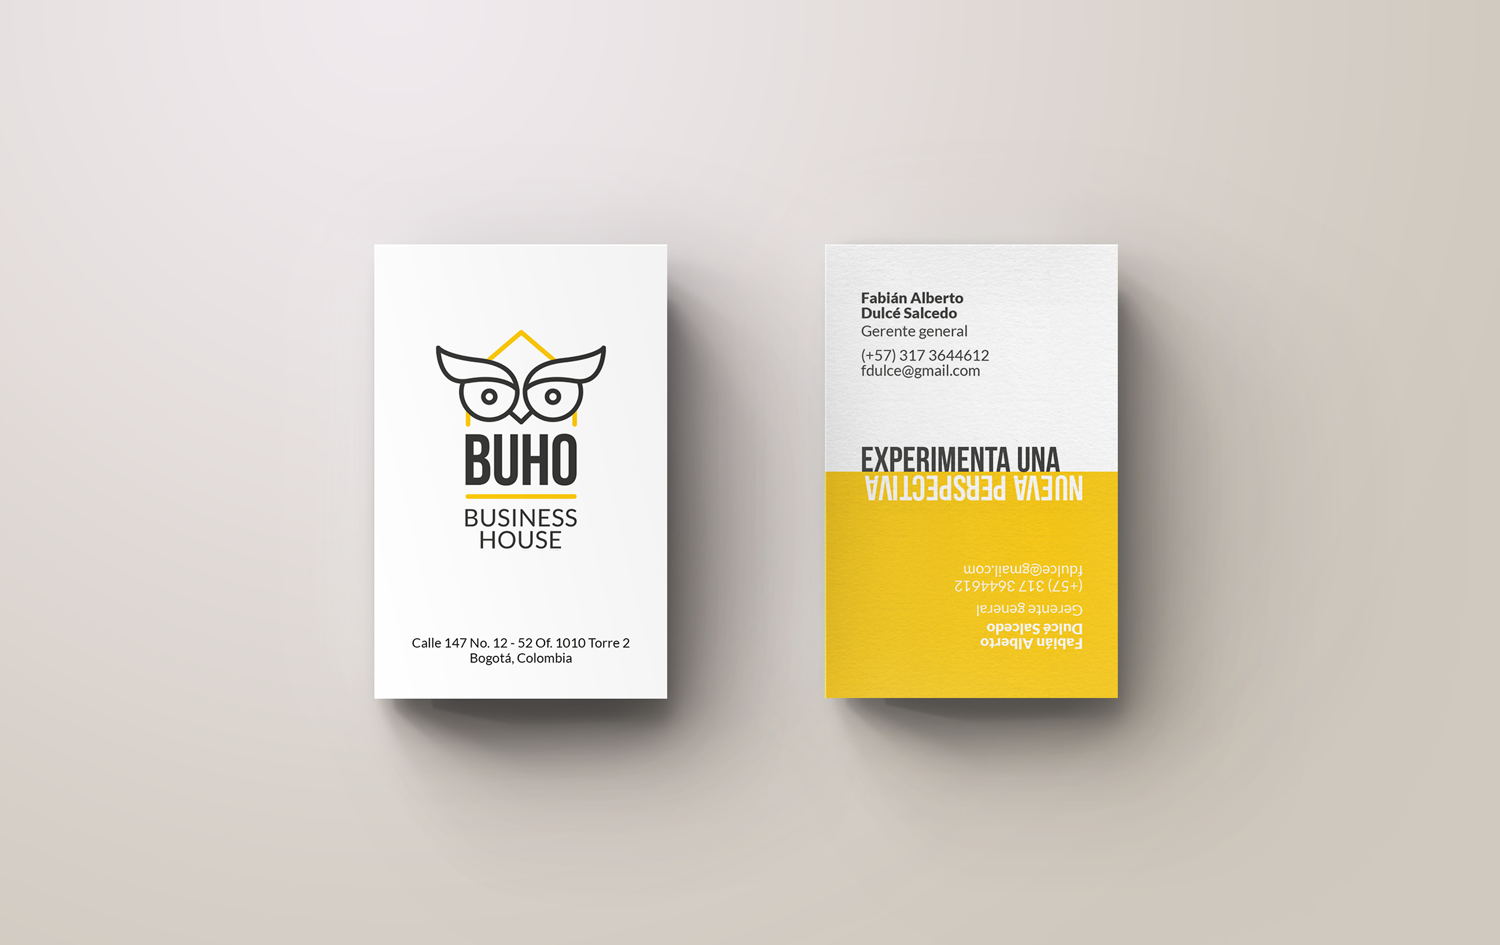 Buho business cards